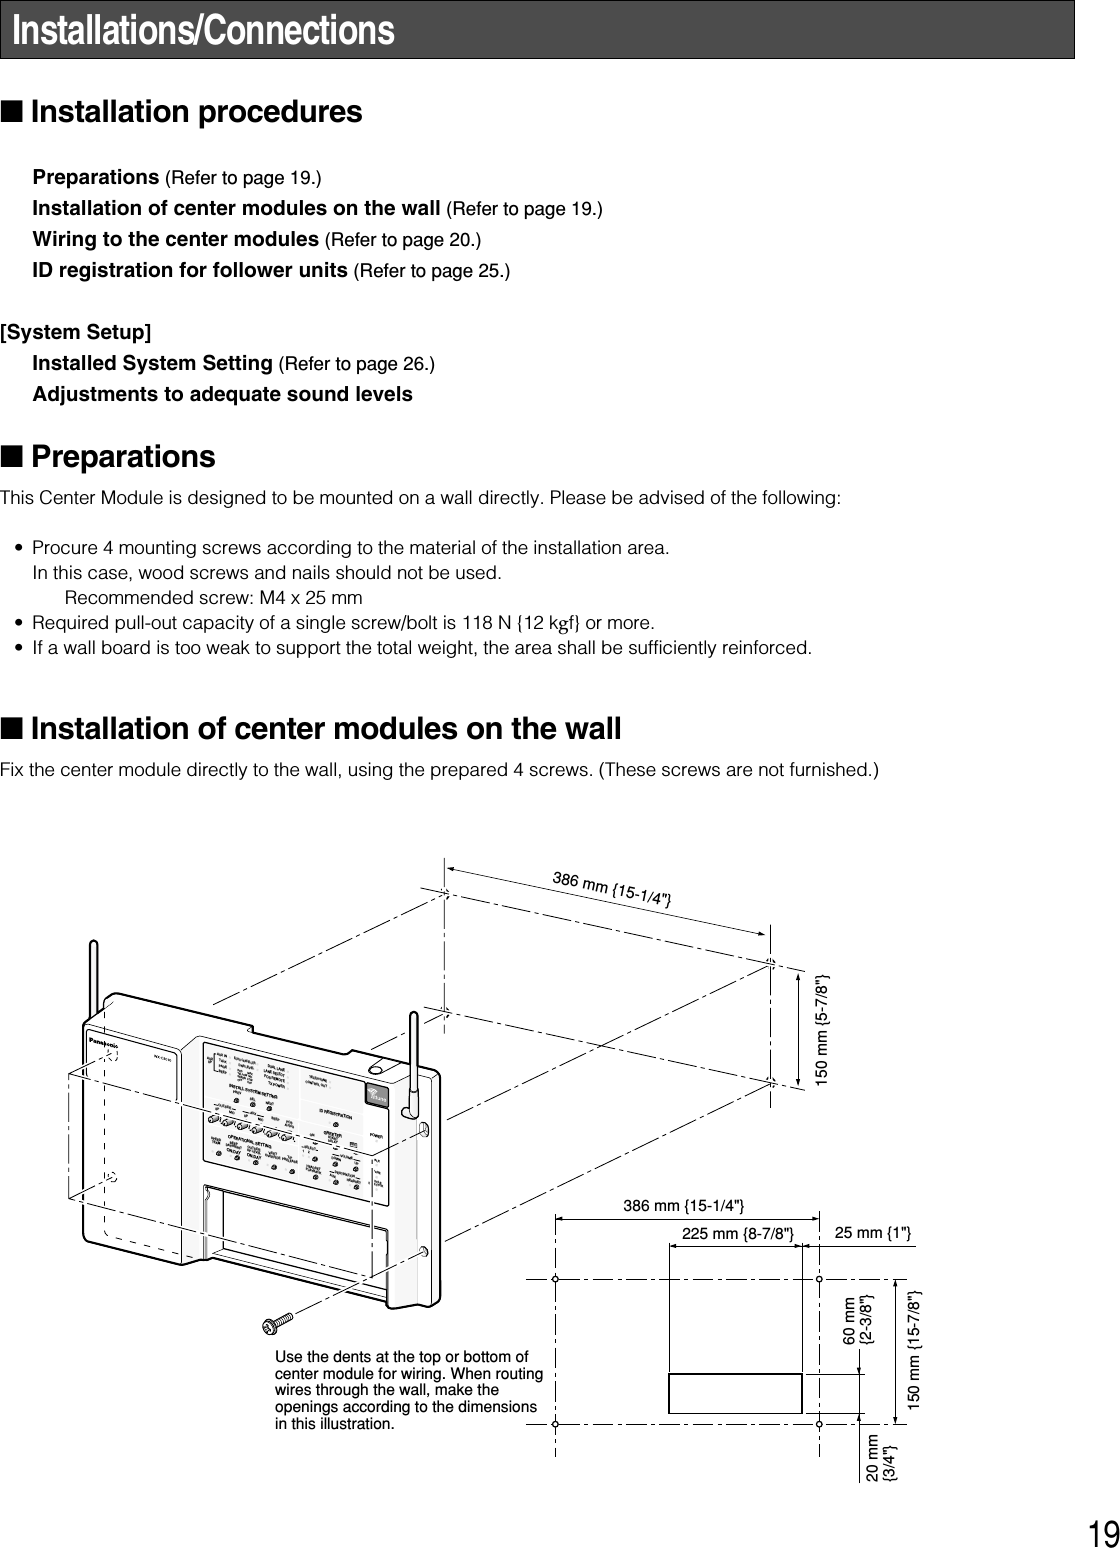 19Installations/Connections■Installation procedures Preparations (Refer to page 19.)Installation of center modules on the wall (Refer to page 19.)Wiring to the center modules (Refer to page 20.)ID registration for follower units (Refer to page 25.)[System Setup]Installed System Setting (Refer to page 26.)Adjustments to adequate sound levels■PreparationsThis Center Module is designed to be mounted on a wall directly. Please be advised of the following: • Procure 4 mounting screws according to the material of the installation area. In this case, wood screws and nails should not be used. Recommended screw: M4 x 25 mm• Required pull-out capacity of a single screw/bolt is 118 N {12 kgf} or more. • If a wall board is too weak to support the total weight, the area shall be sufficiently reinforced.■Installation of center modules on the wallFix the center module directly to the wall, using the prepared 4 screws. (These screws are not furnished.) INSTALL SYSTEM SETTINGOPERATIONAL SETTINGID REGISTRATIONGREETERPOWERTELEPHONECONTROL OUTSTARTDELAYONDOWNPREVECHO CANCELLERDNR LEVELDUAL LANELANE SELECTPOS REMOTETX POWERRED        MAXYELLOW  MDGREEN  LOWOFF        OFFSELAUXSPAUX INTALKPAGEBEEPNEXTOUTSIDESPEEDTEAMBEEPDAY/NIGHTON:DAYOUTSIDESP LEVELON:DAYV/DETOVERRIDET/PPRELEASESPMICSP MICAUXBEEPPOSAUDIOUP12RECTALKPAGEVEHICLEDETECTORSELECTVOLUMEDESTINATIONAUXHEADSETHEADSETPLAYBACK386 mm {15-1/4&quot;}150 mm {15-7/8&quot;}20 mm{3/4&quot;}60 mm{2-3/8&quot;}150 mm {5-7/8&quot;}225 mm {8-7/8&quot;}386 mm {15-1/4&quot;}25 mm {1&quot;}Use the dents at the top or bottom of center module for wiring. When routing wires through the wall, make the openings according to the dimensions in this illustration.